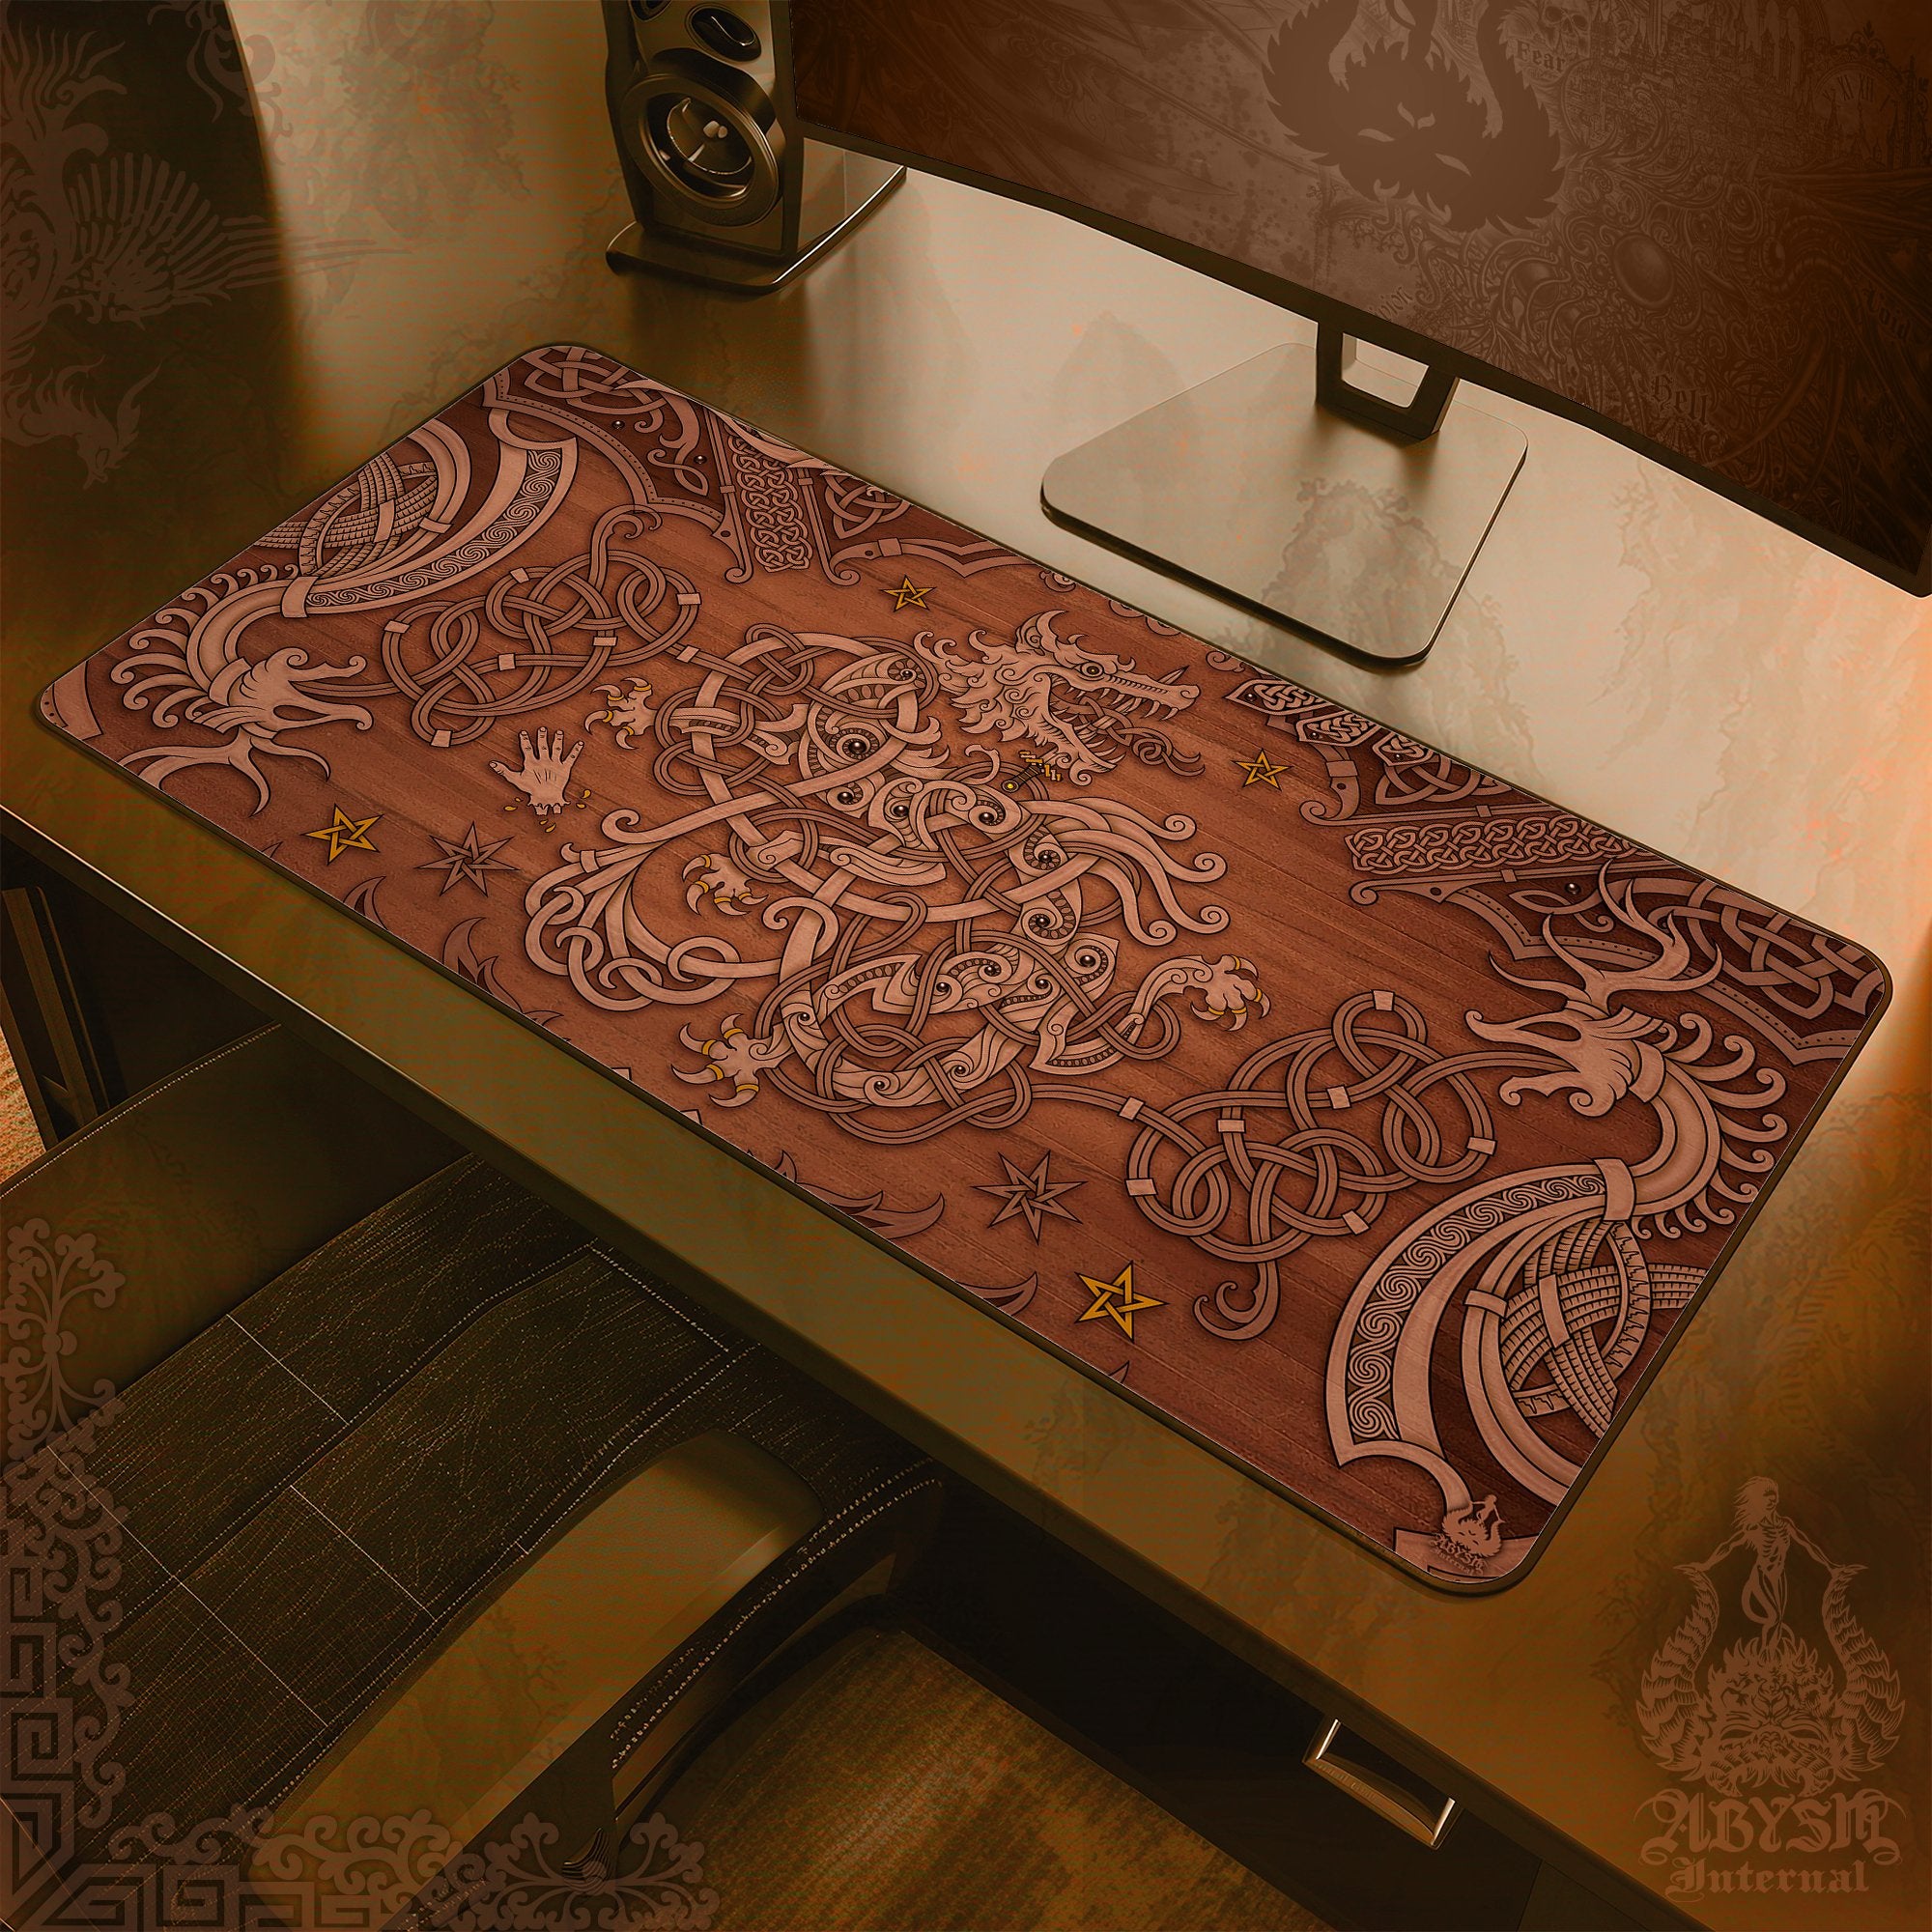 Nordic Wolf Workpad, Norse Knotwork Desk Mat, Fenrir Gaming Mouse Pad, Viking Table Protector Cover, Art Print - Wood - Abysm Internal